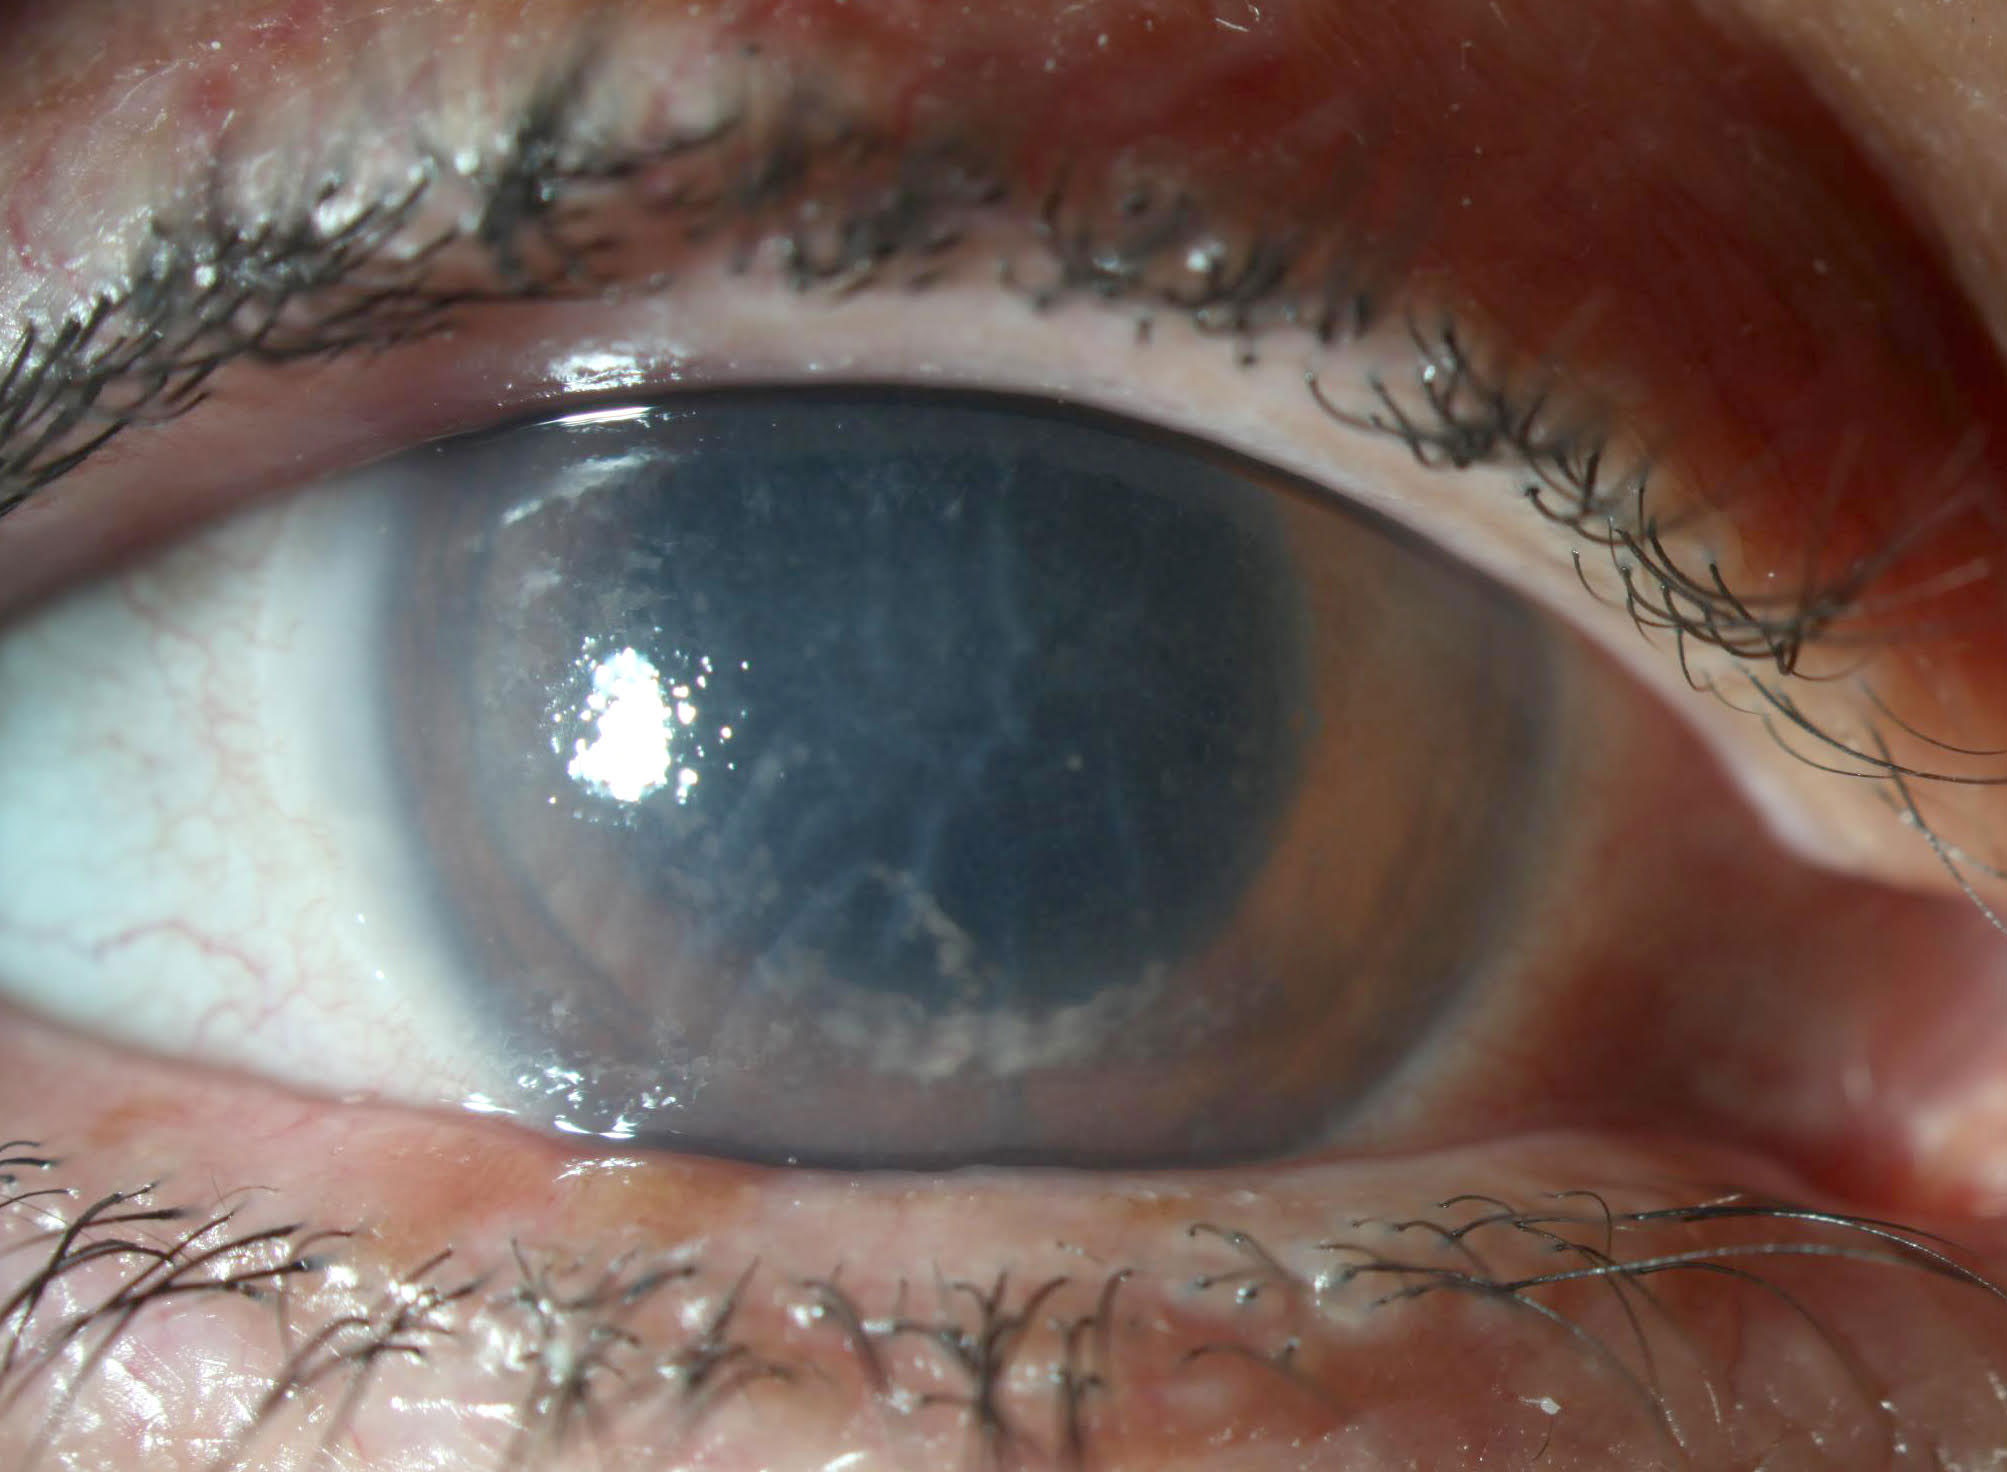 Improvement in corneal involvement after one week of aggressive therapy.